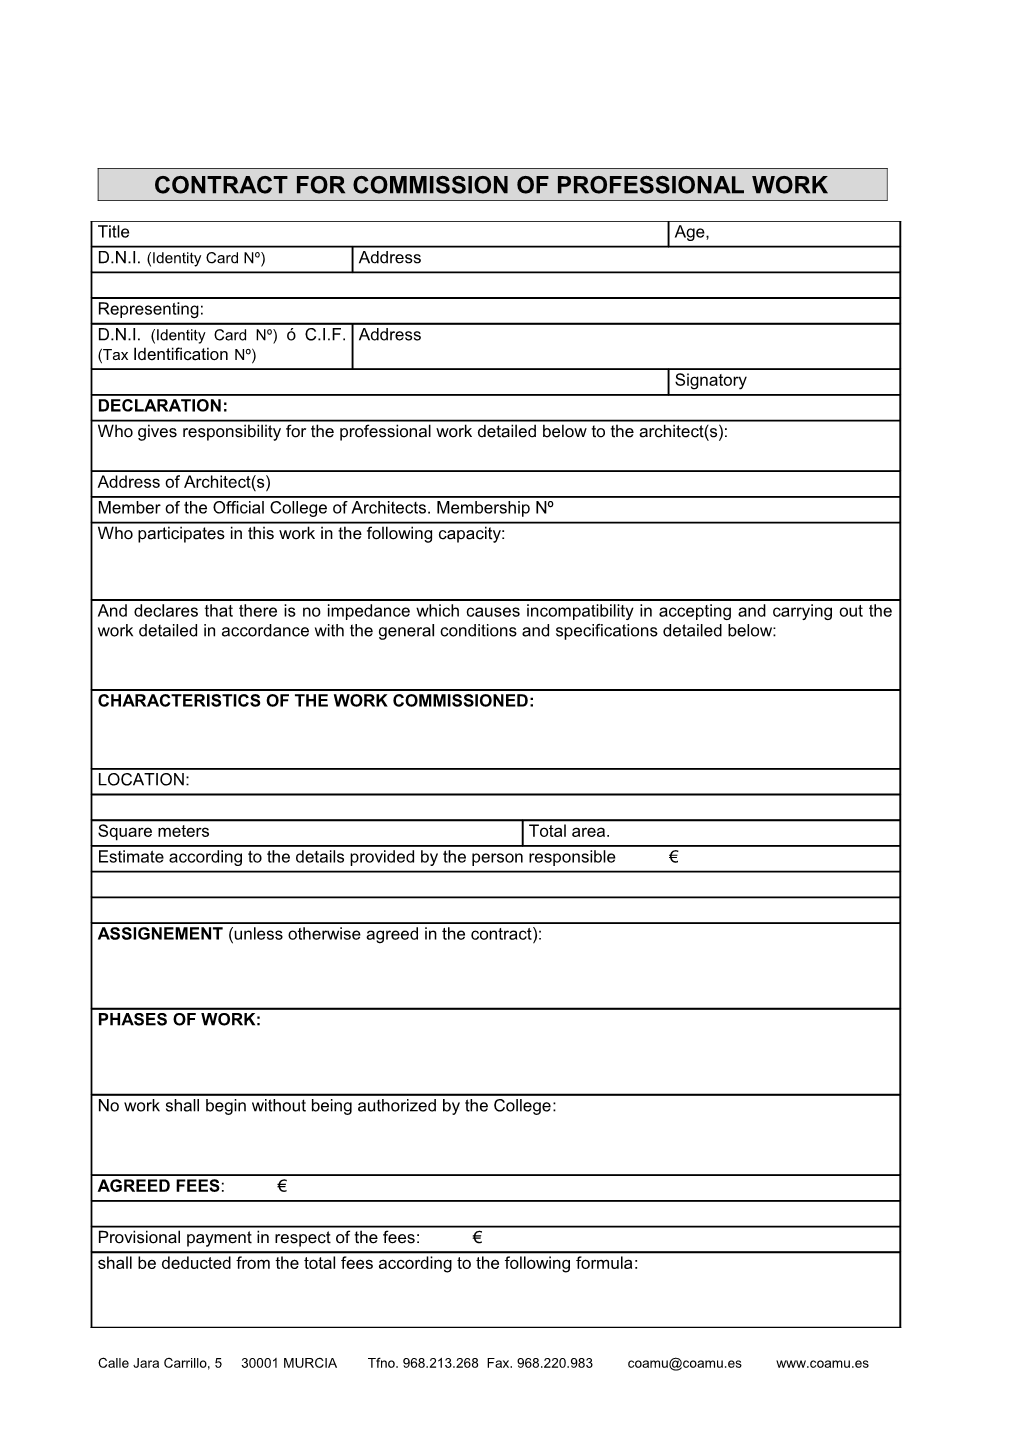 Contract for Commission of Professional Work